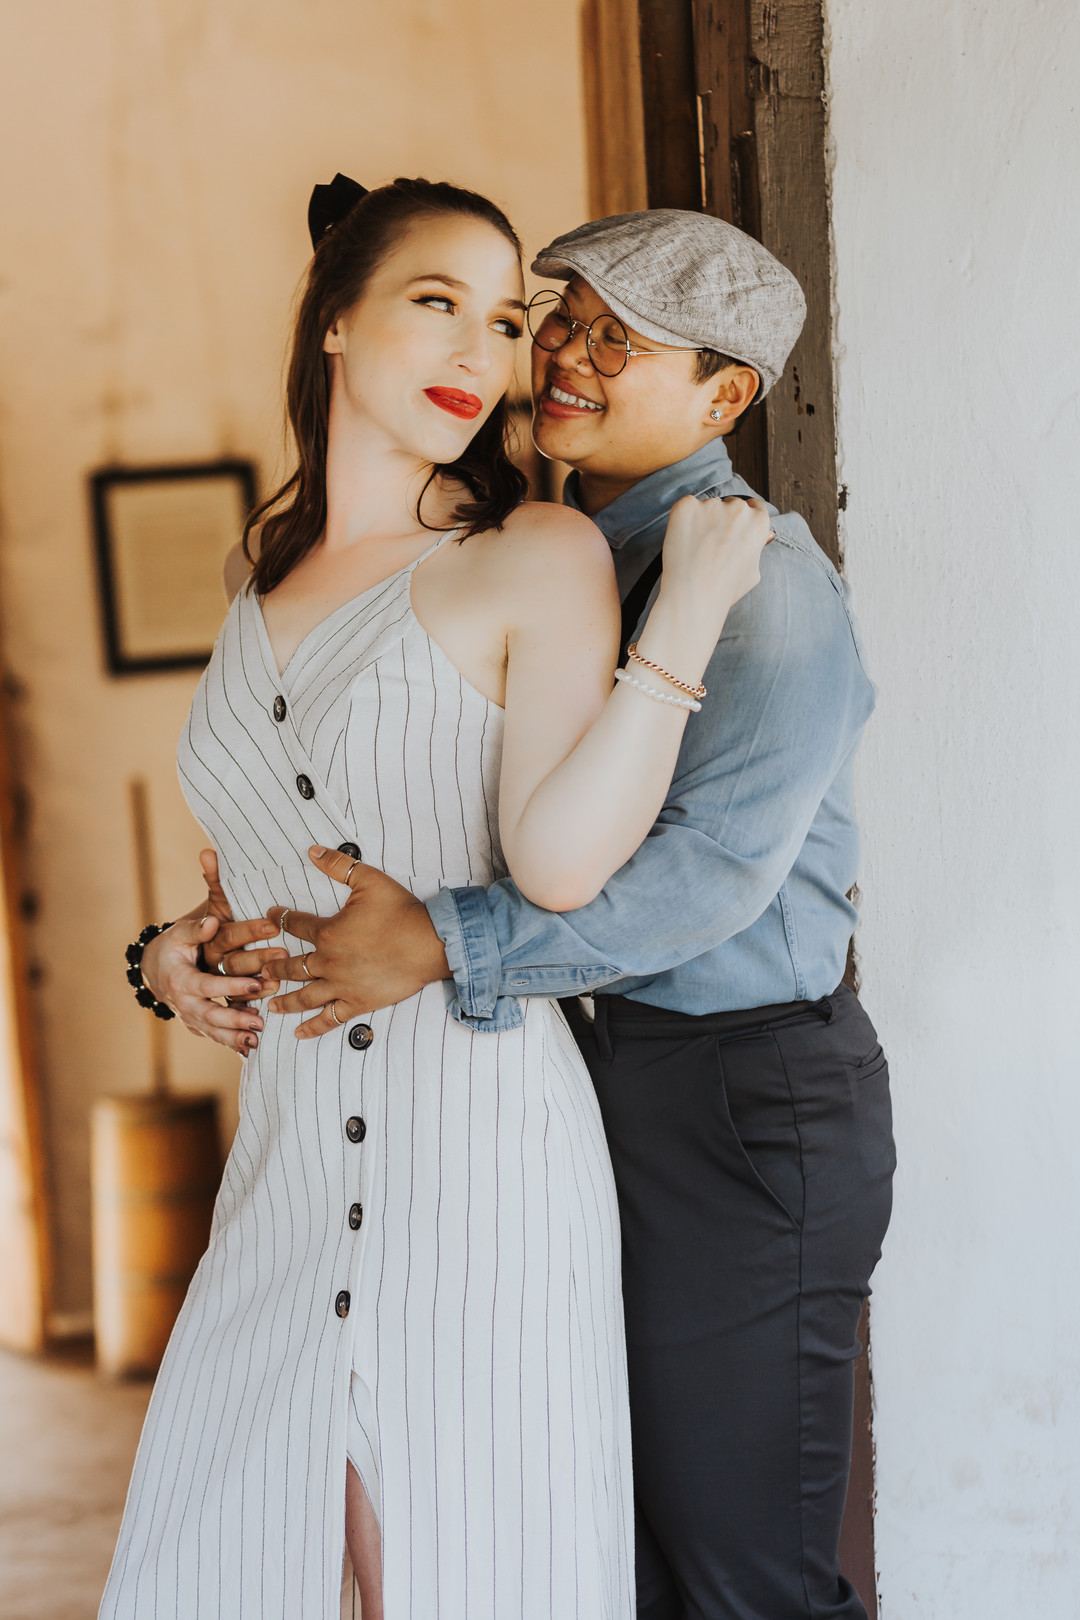 Engagement photos in the historic Los Rios district in California engaged two brides striped dress suspenders boots cuddling